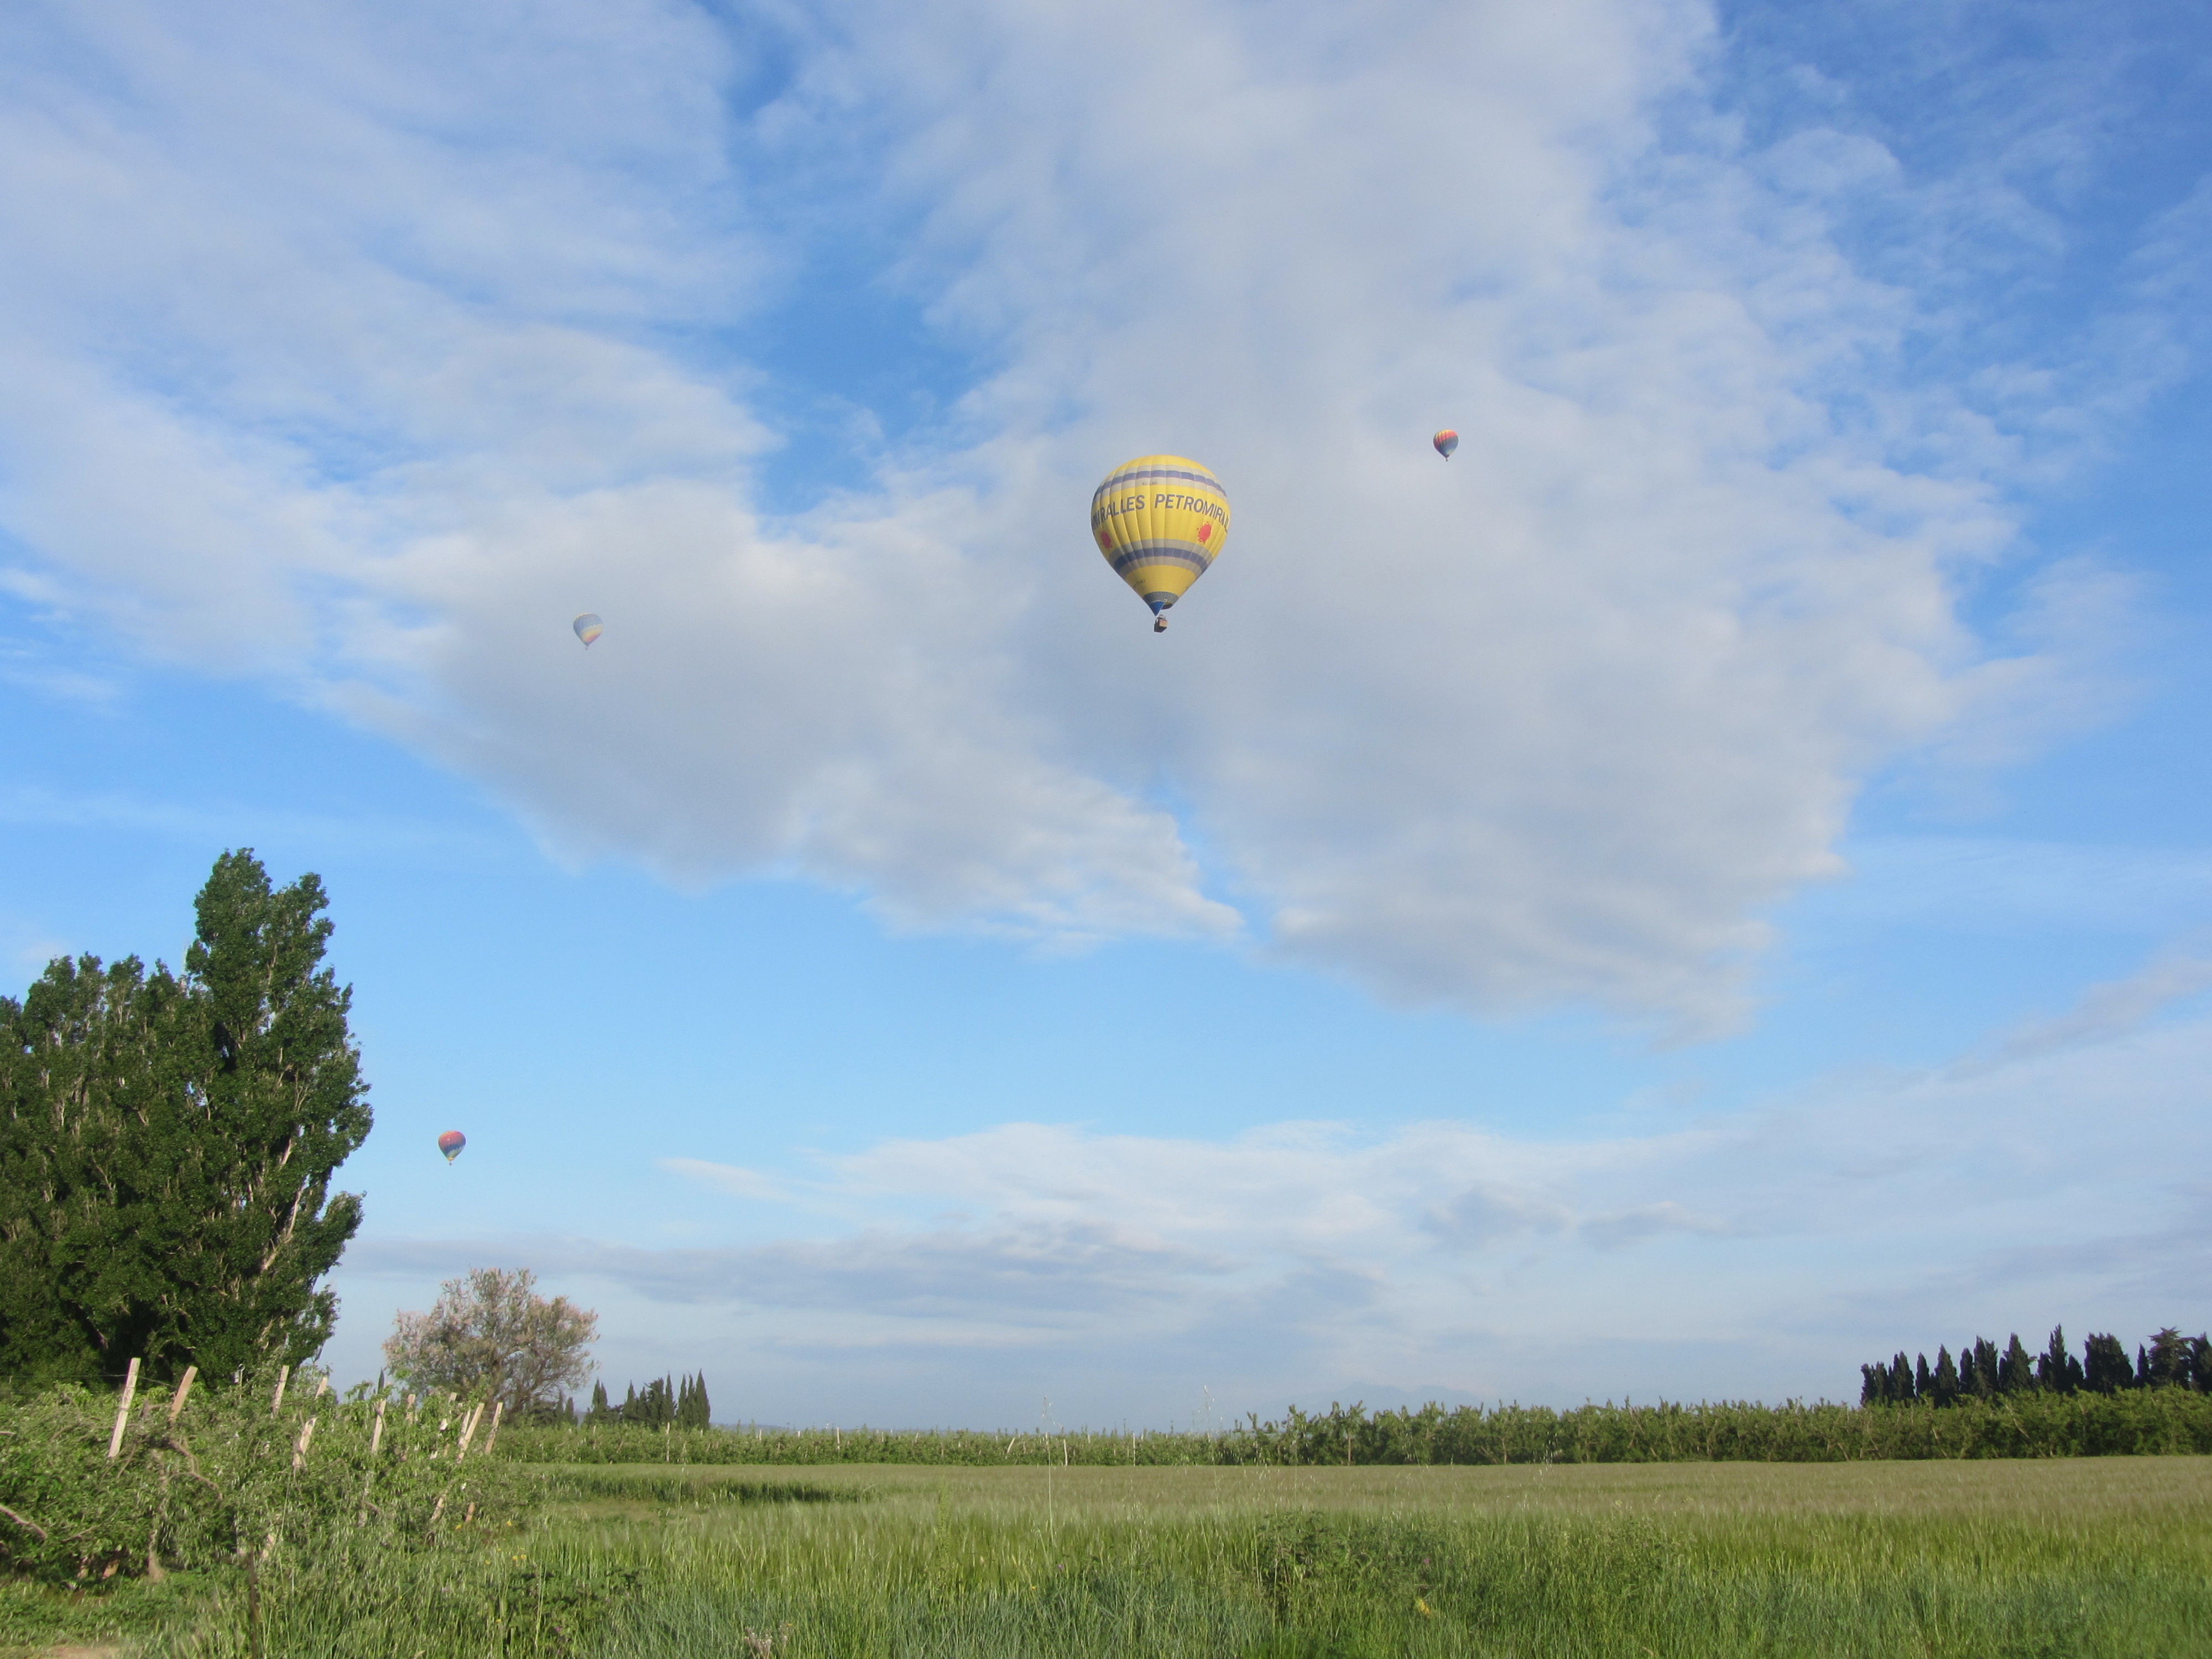 Hot air balloon over the countryside